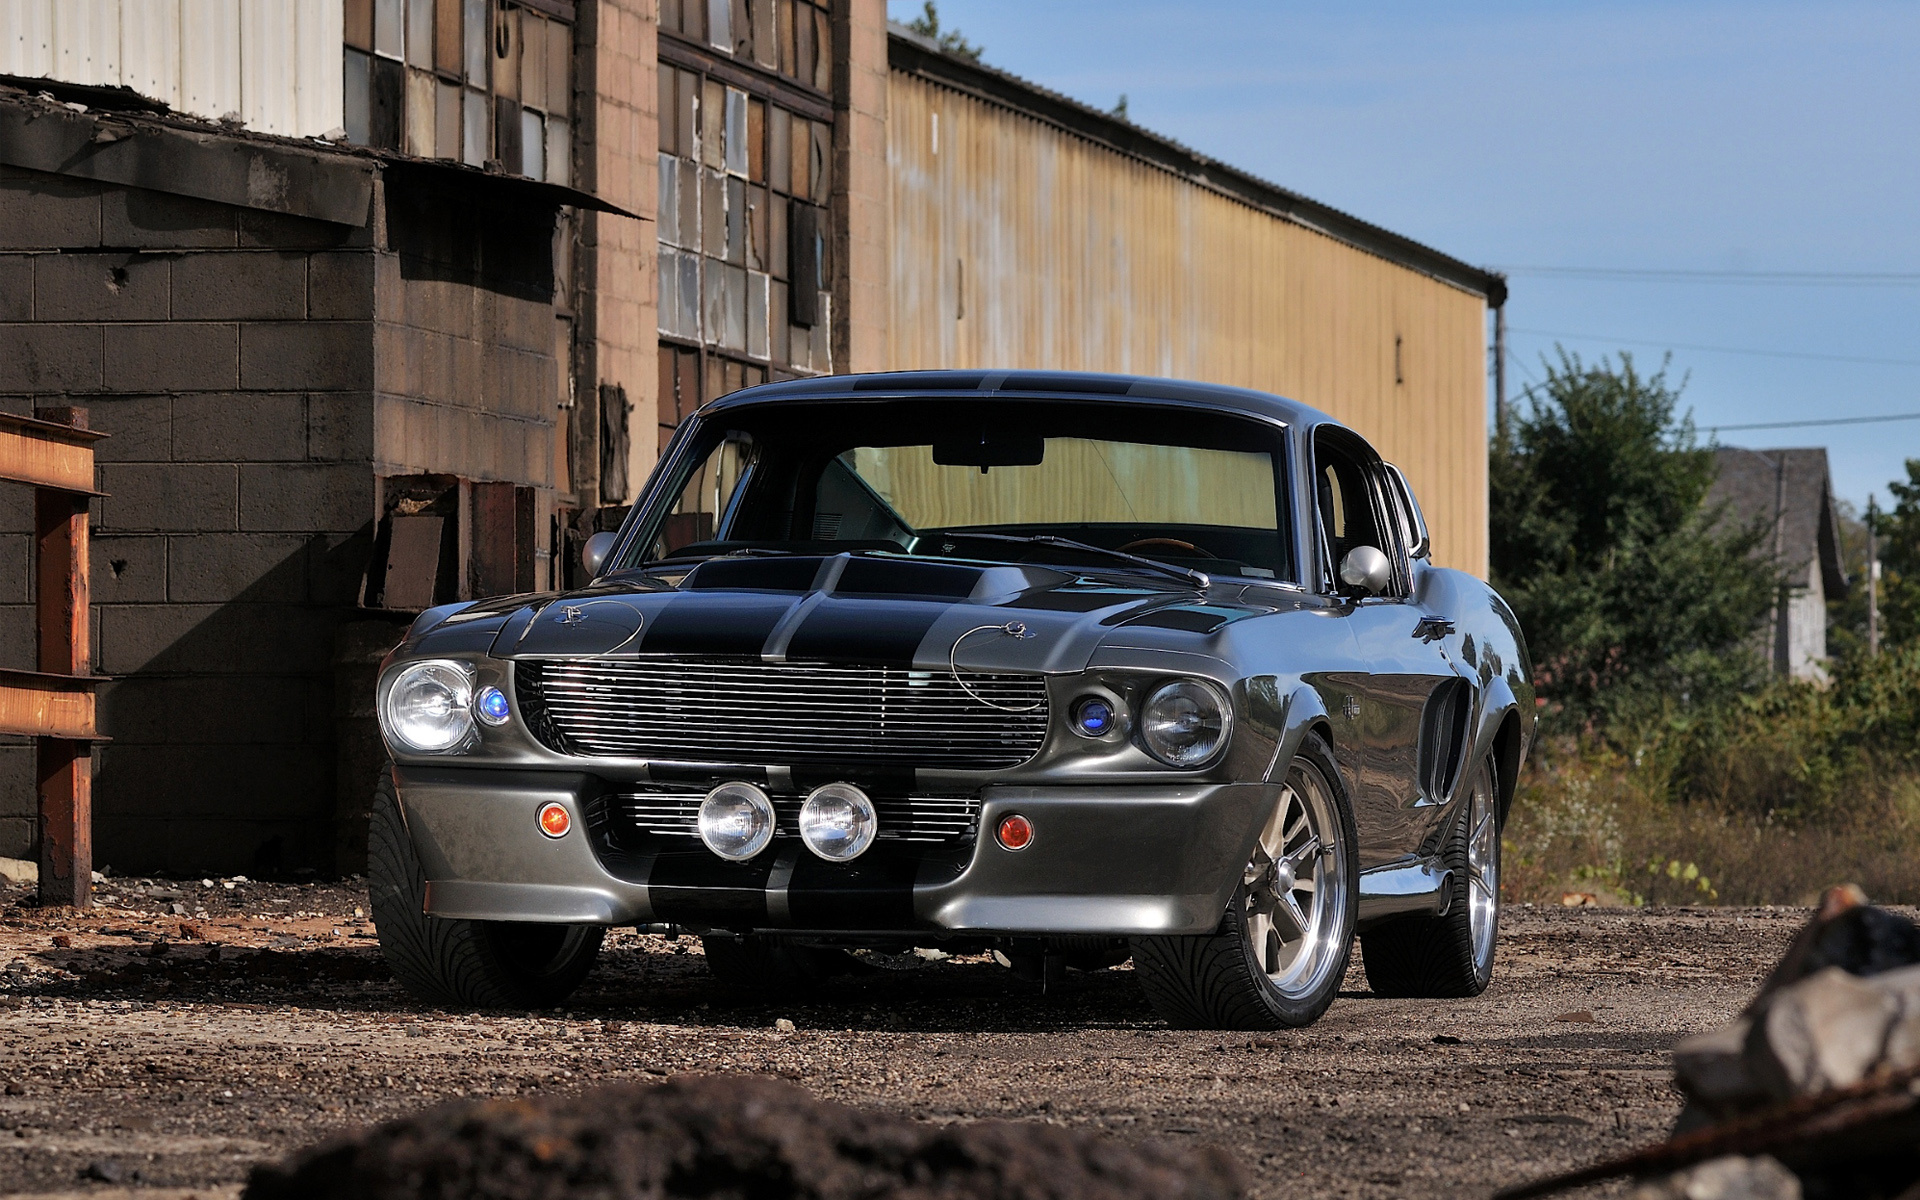 1967 Ford Mustang, Legendary Eleanor, High-definition, Vintage style, Automotive classic, 1920x1200 HD Desktop